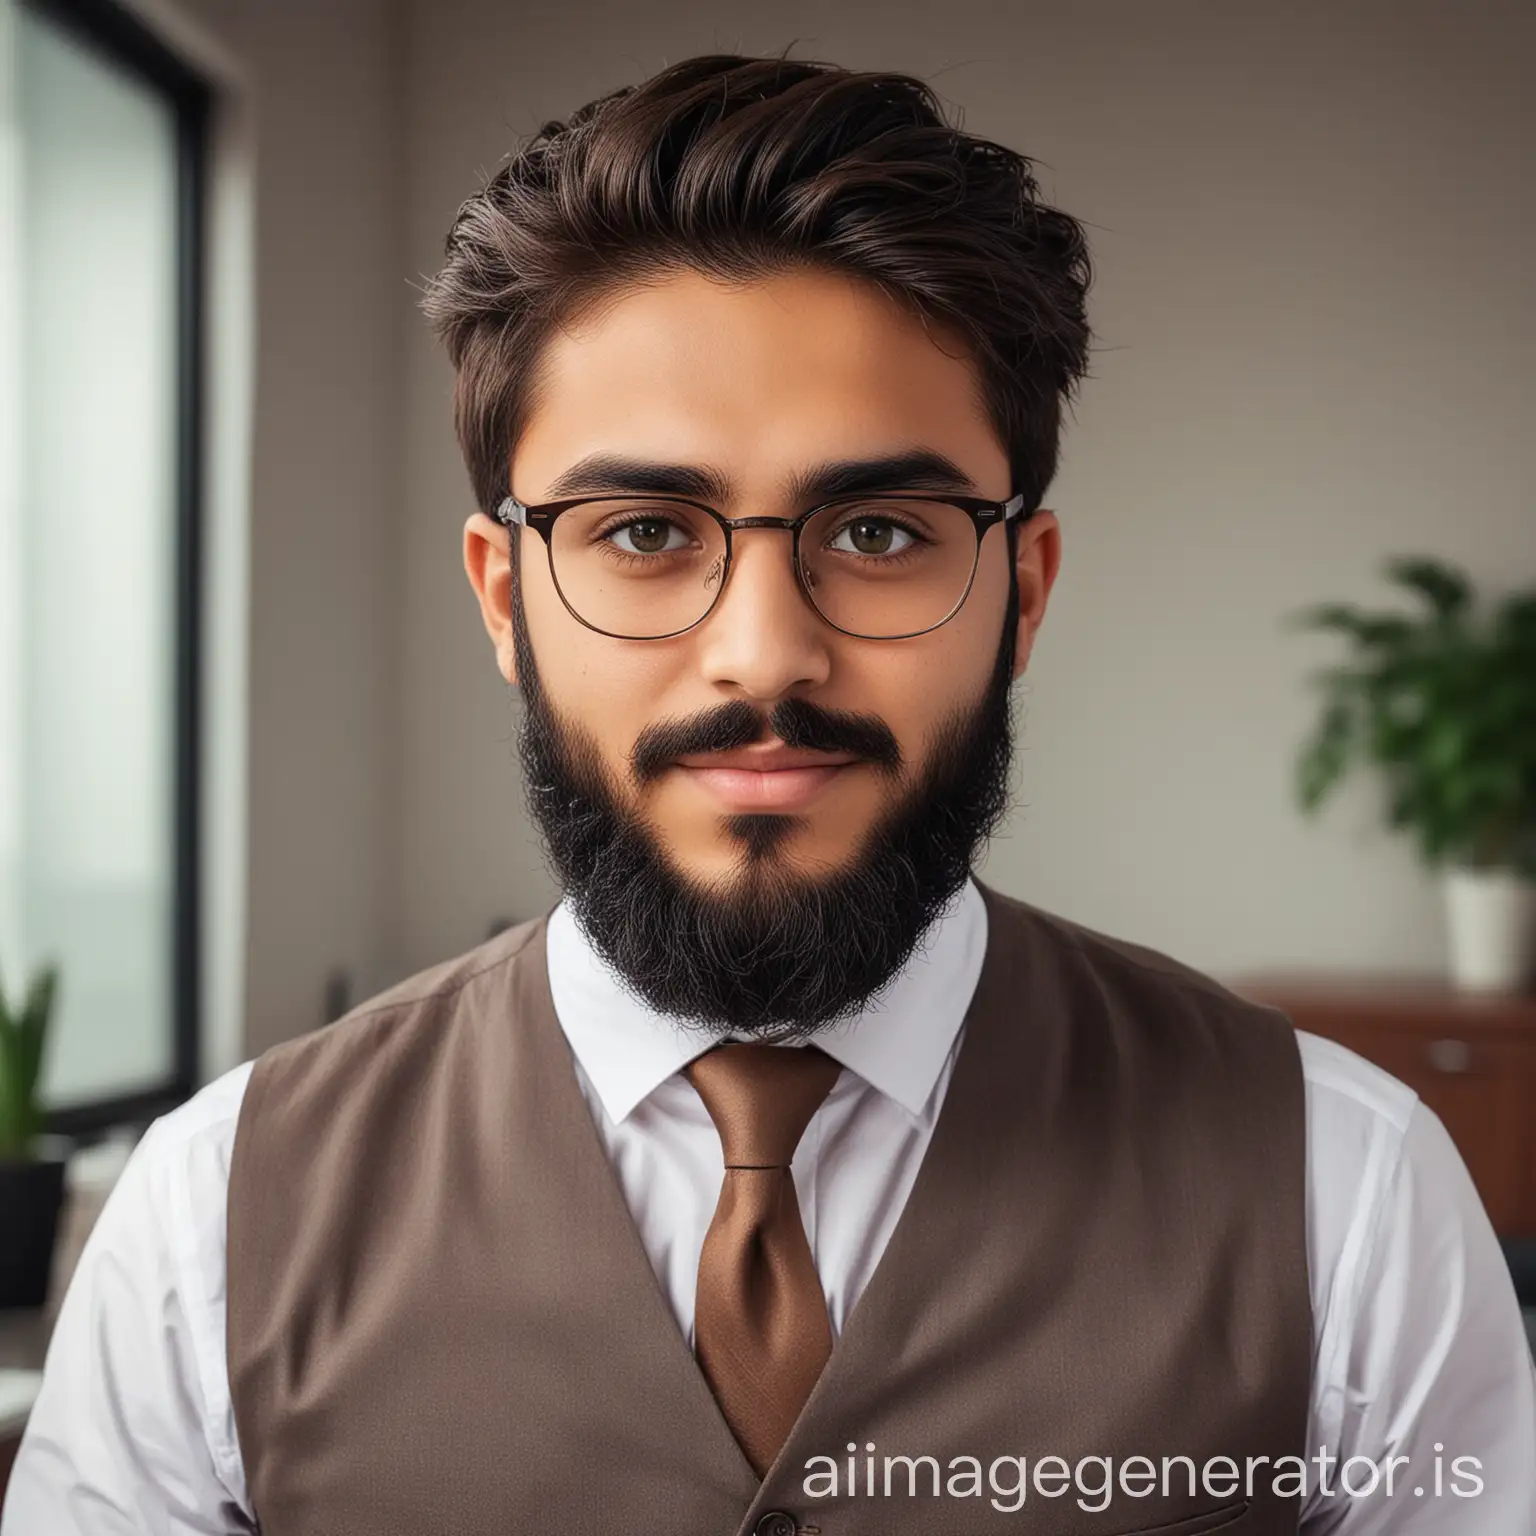 24 year old afghan boy With brown full beard, freshly cut back combed hair, green eyes and  fair skin Wearing spectacles and narrow body Posing for a linkedin picture in formals in his modern office